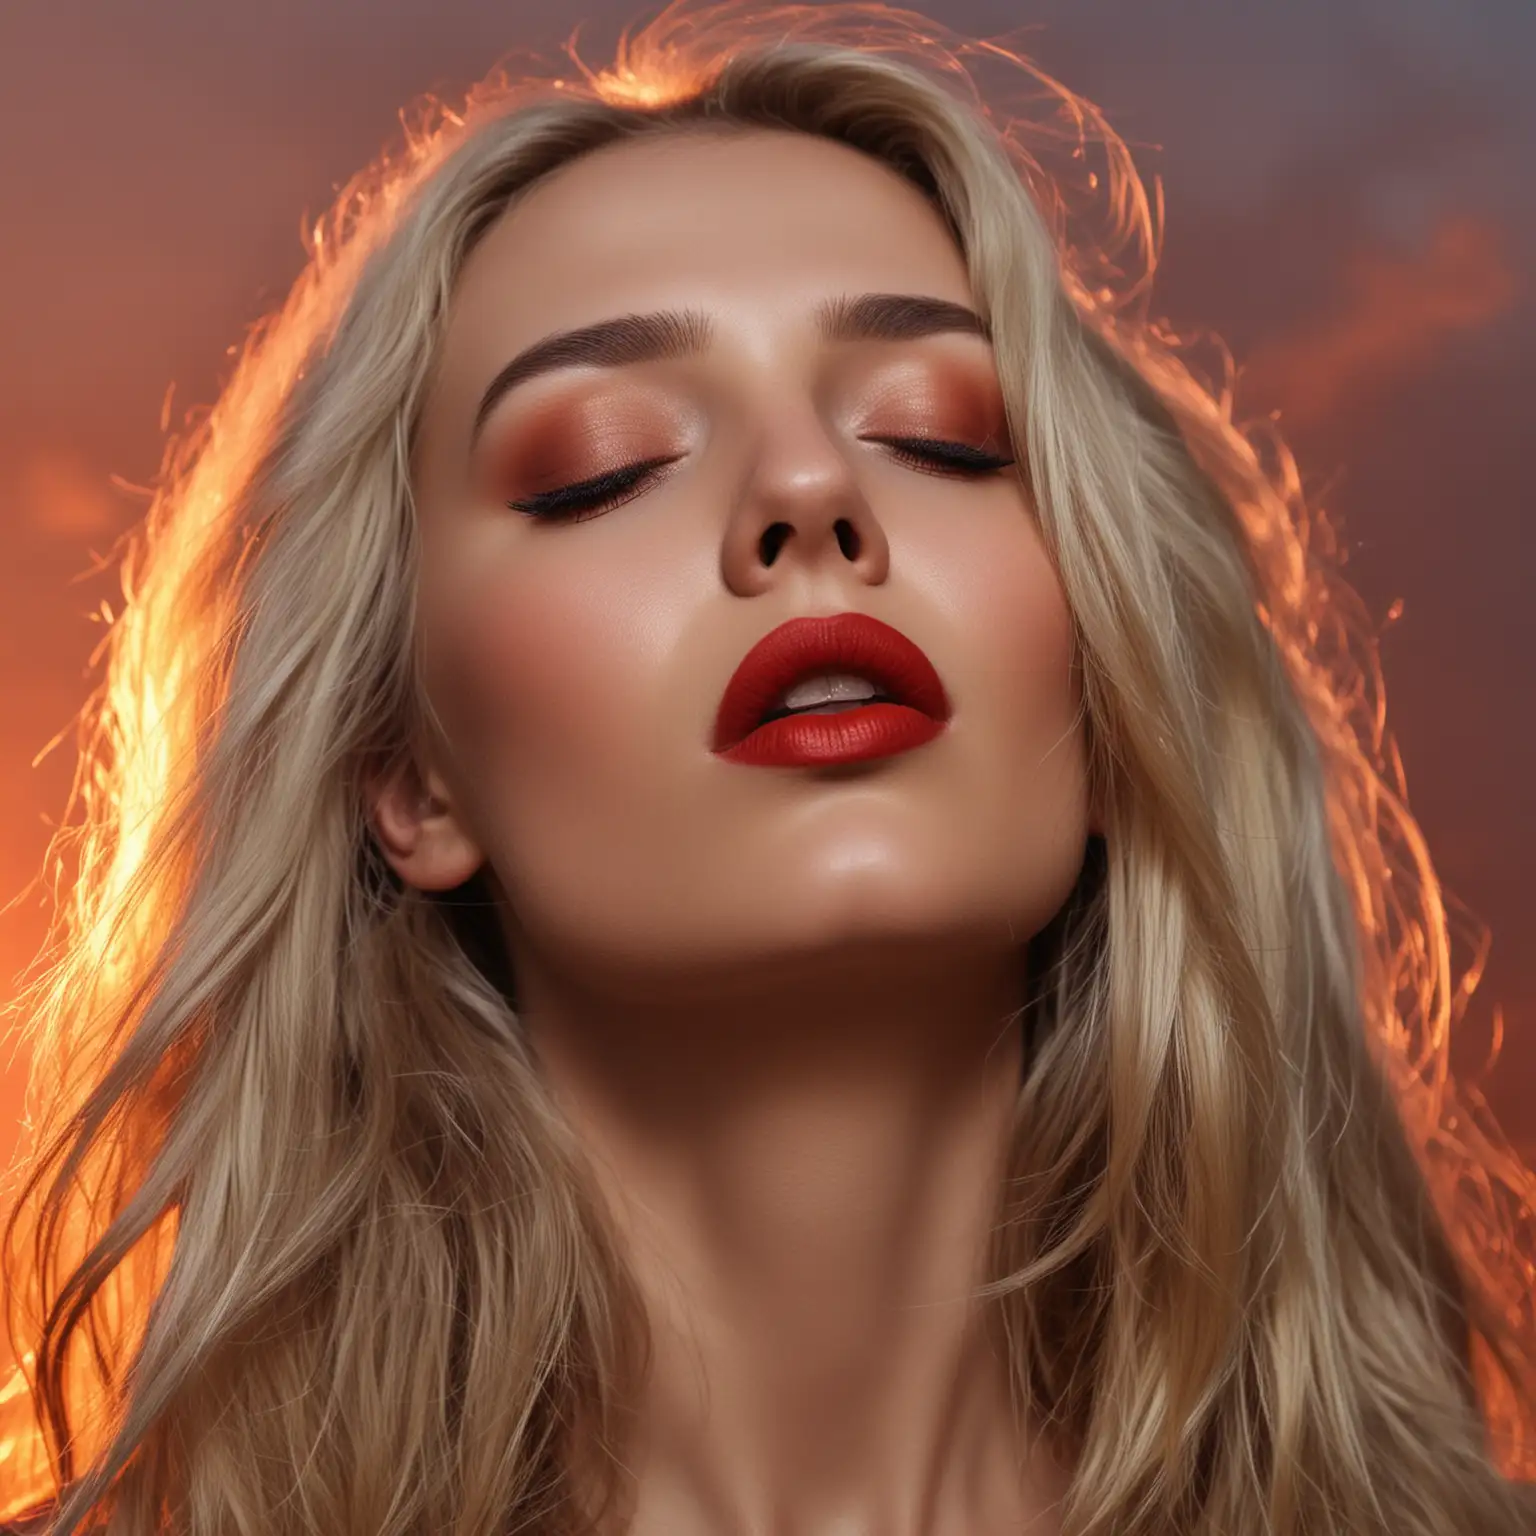 Sensual-Blonde-Girl-with-Red-Lips-in-Sunset-Ambiance